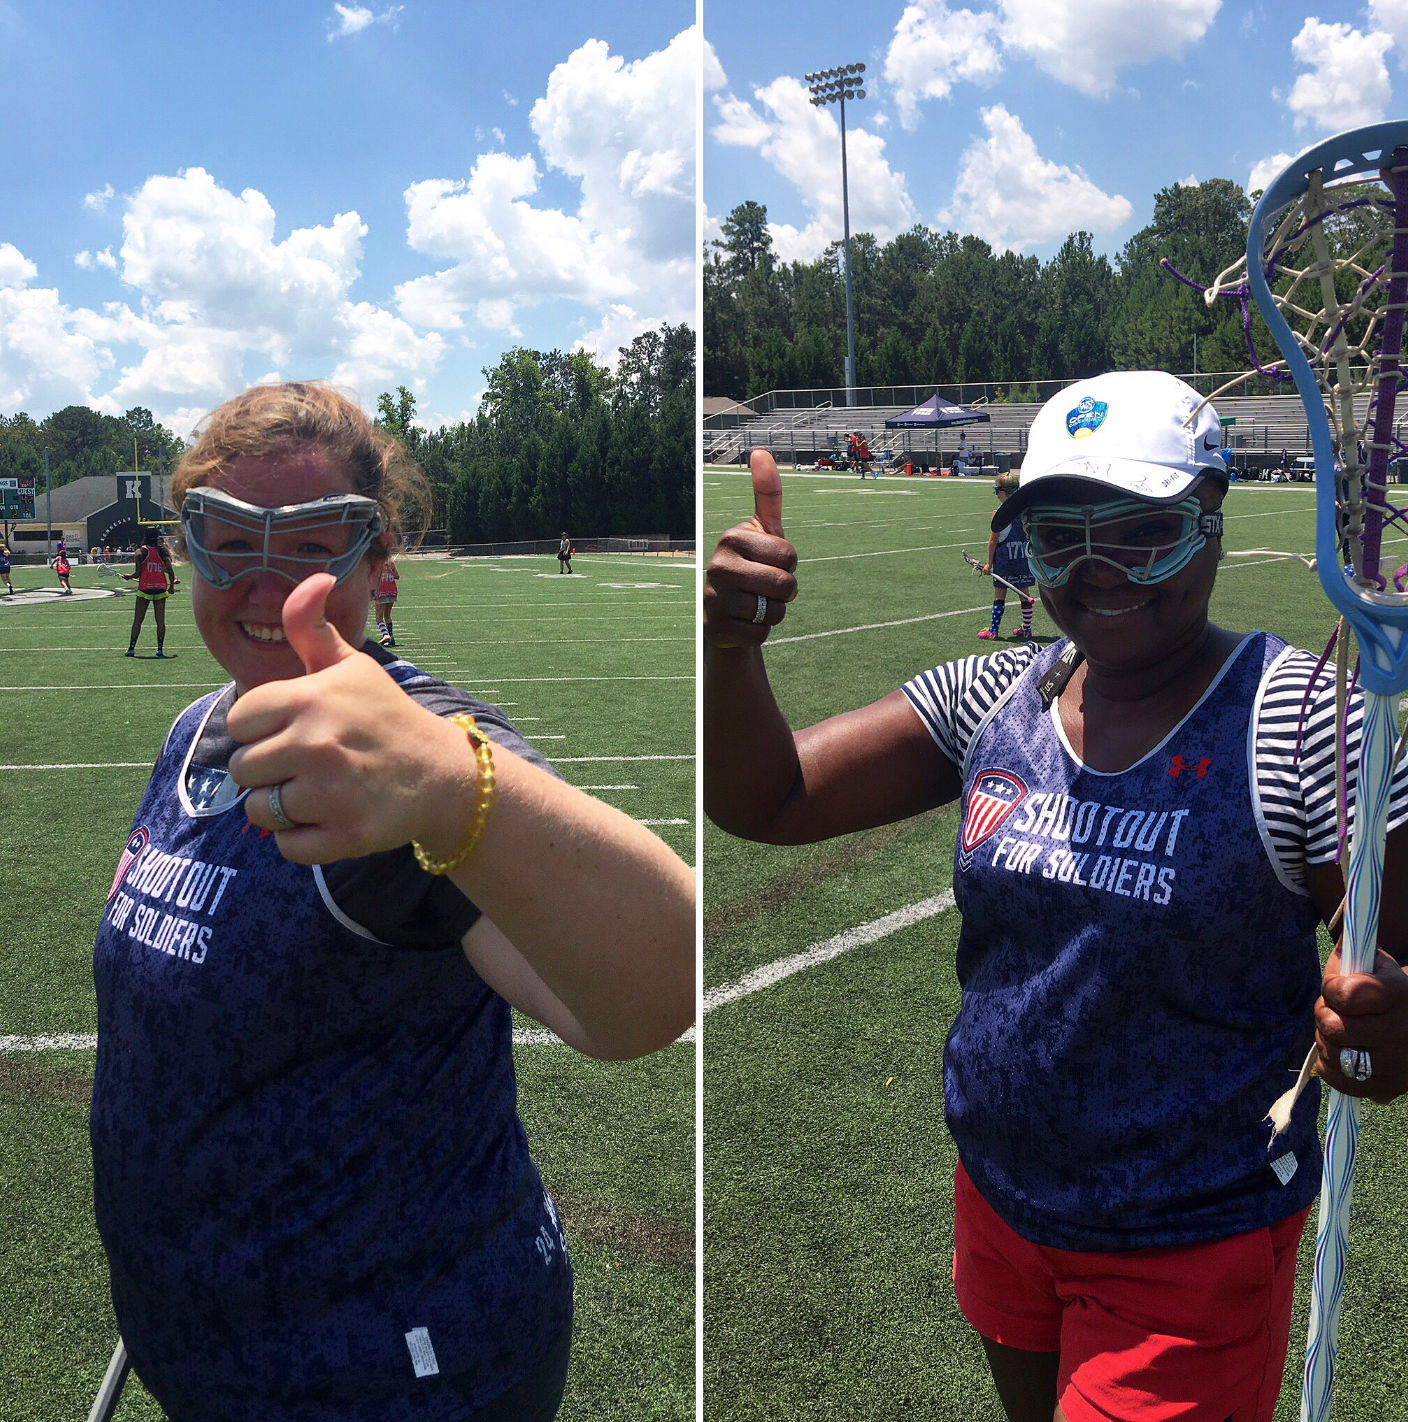 Lady Bear Moms Play in First Lacrosse Game Ever, Tackle SFS Atlanta